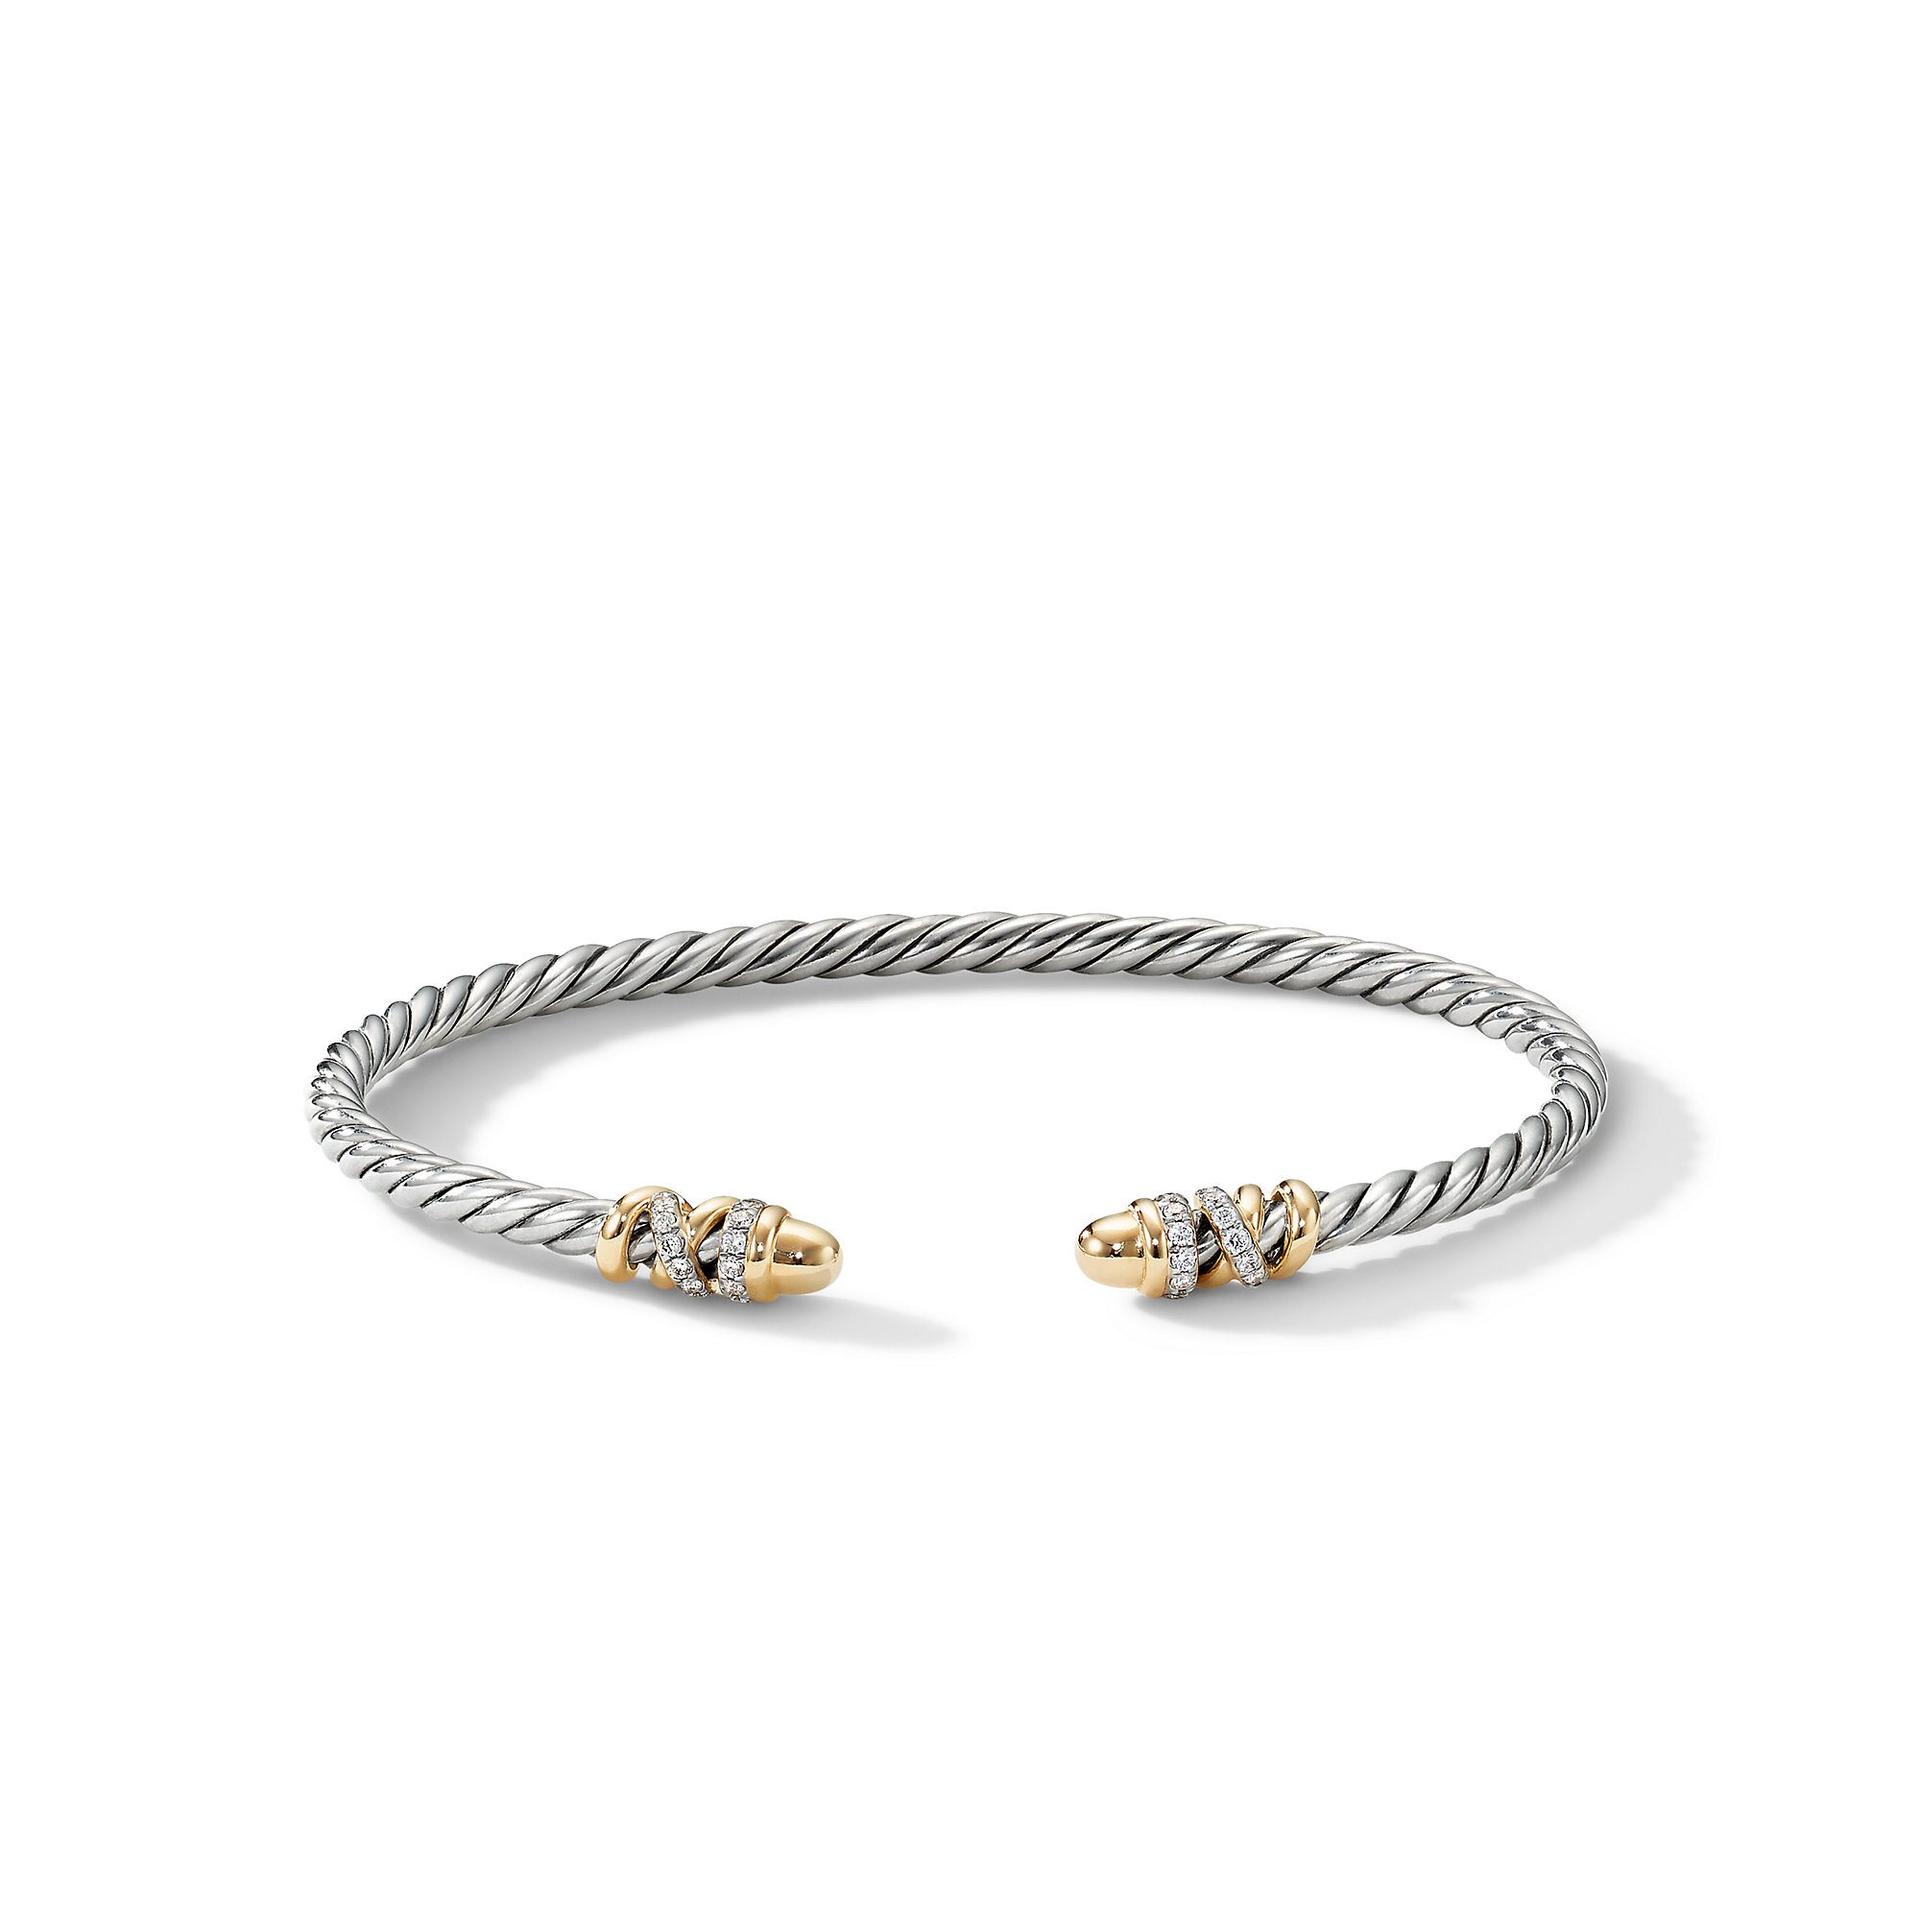 David Yurman | Petite Helena Open Bracelet with Pearls, 18K Yellow Gold and Diamonds | Front View